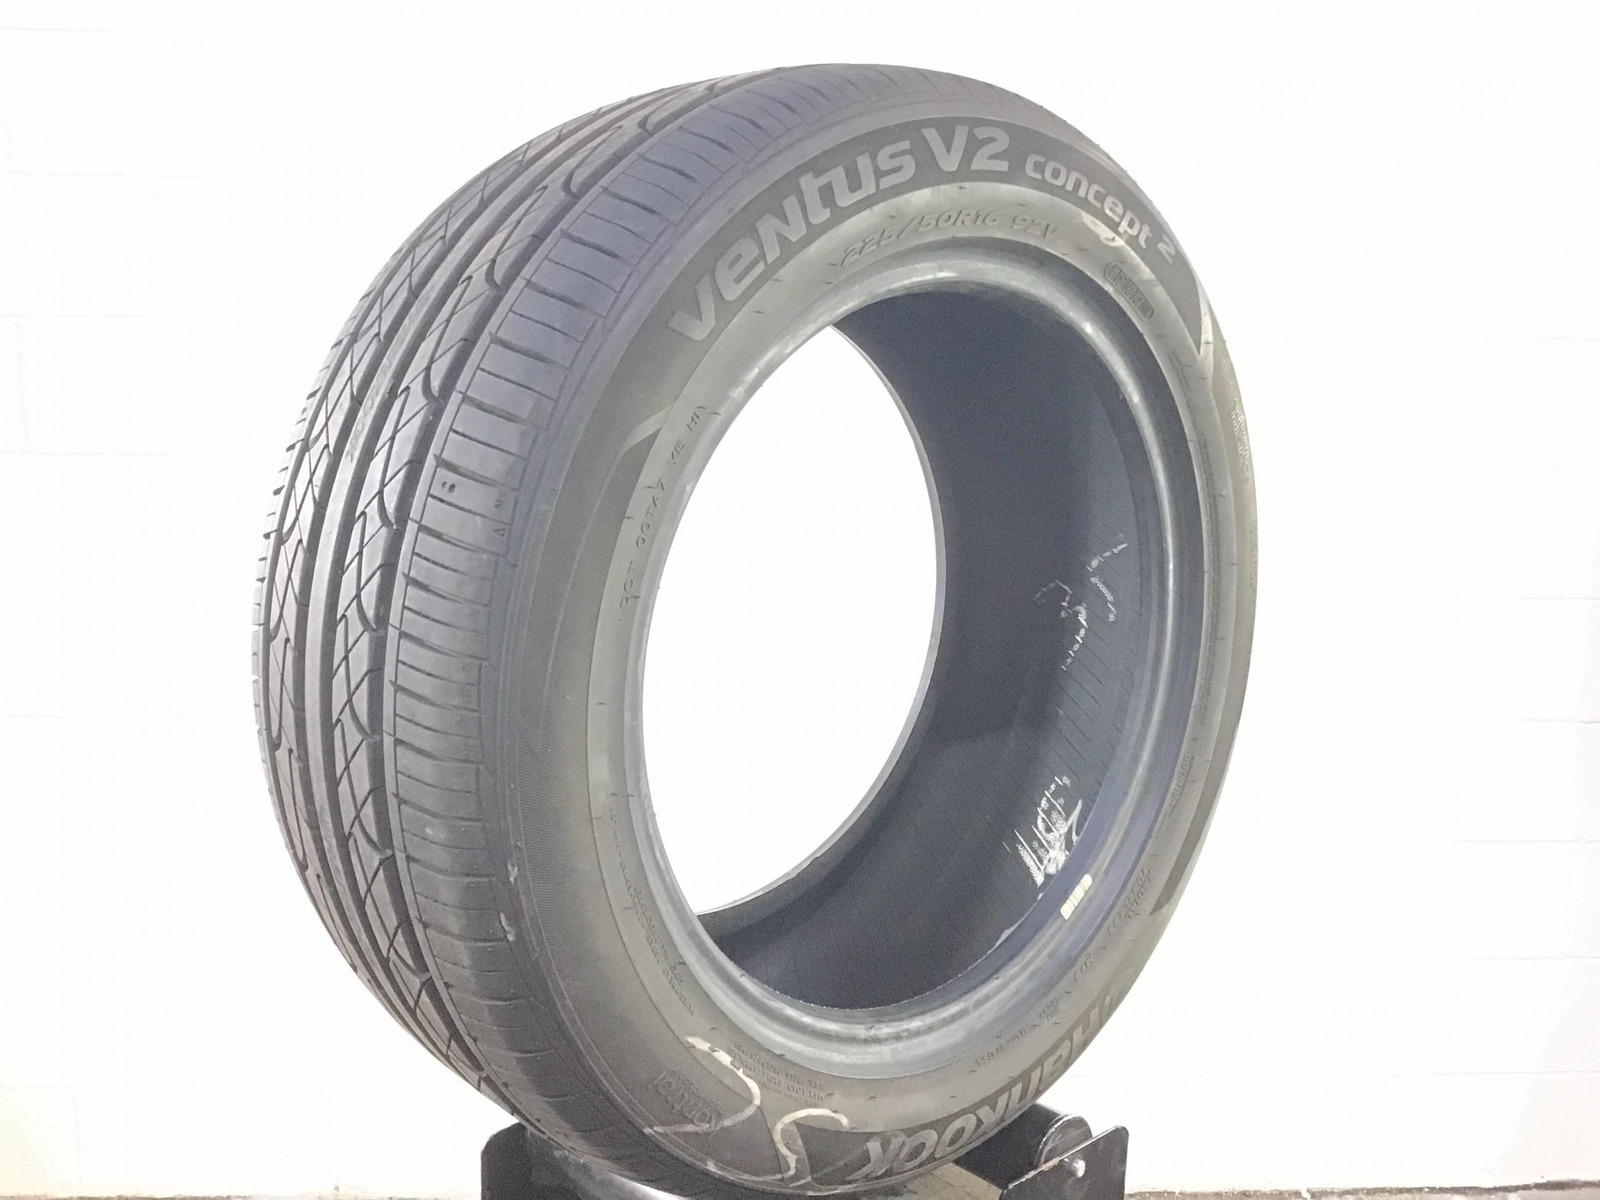 P225/50R16 Hankook Ventus V2 Concept 2 92 V Used 9/32nds